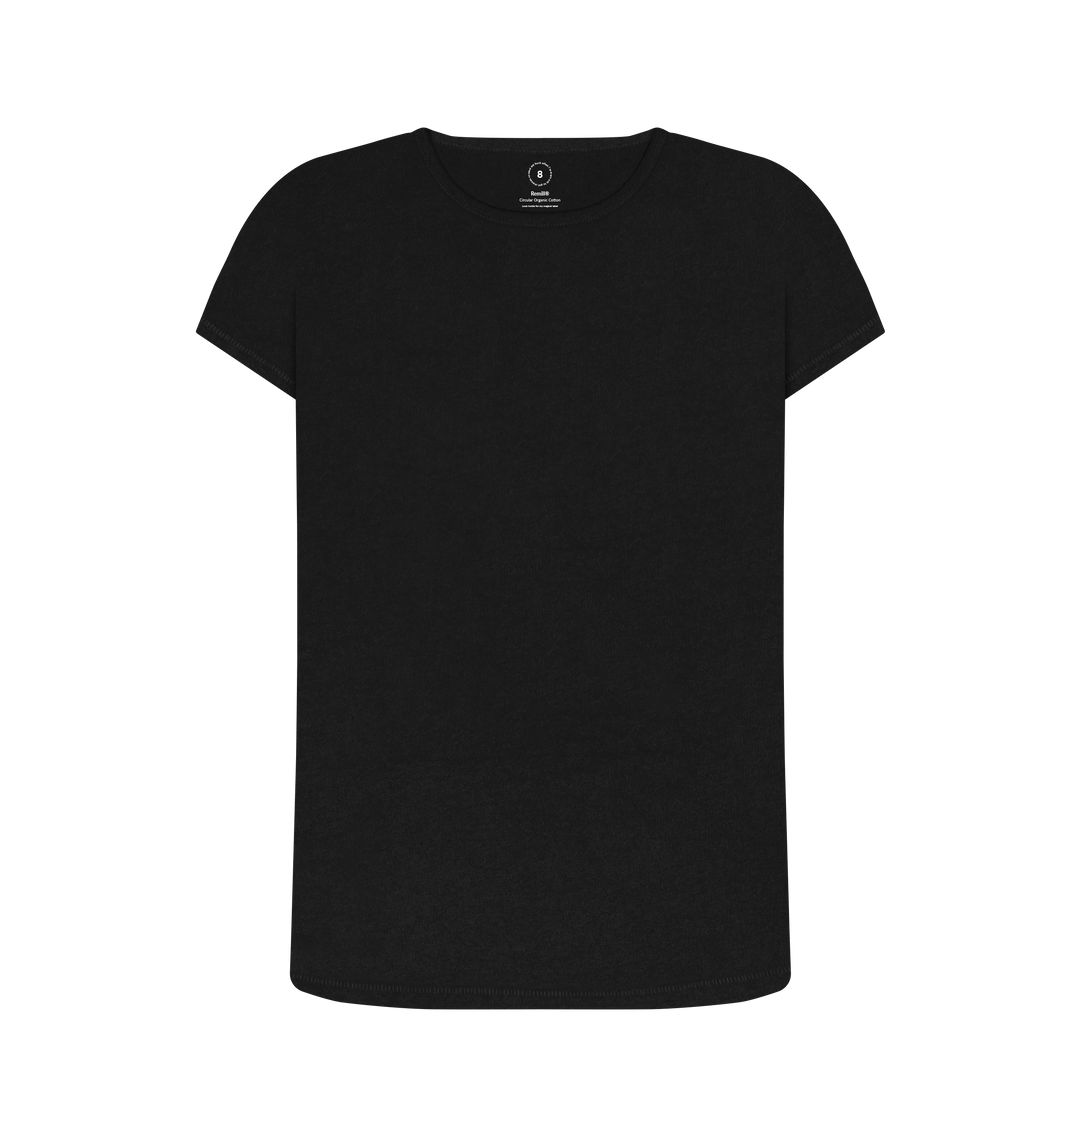 Black Women's sustainable essential t-shirt